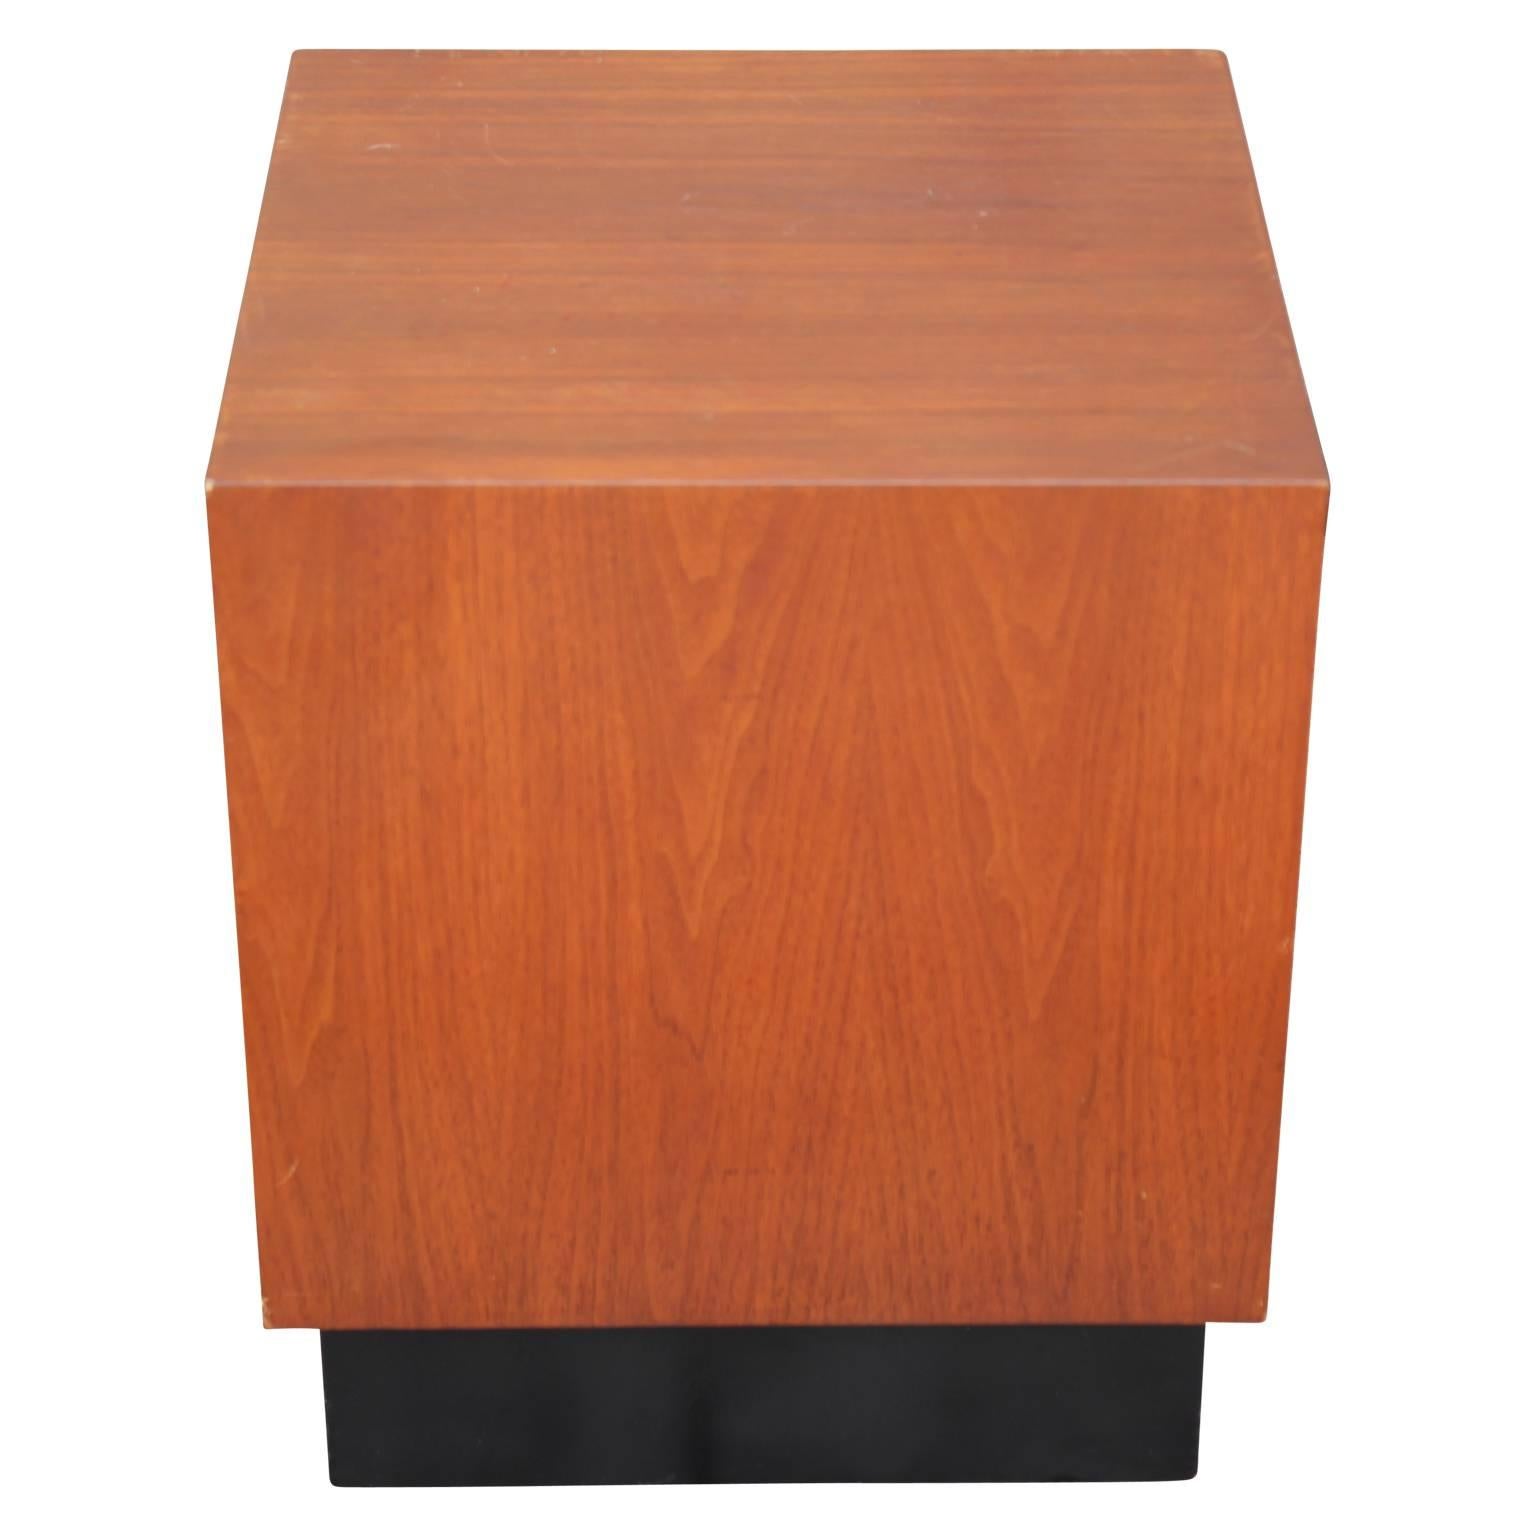 Modern pair of large Walnut cube end or side tables with black bases. Tables have very minimalist lines and a lively grain. In the style of Milo Baughman. Circa 1970's. 